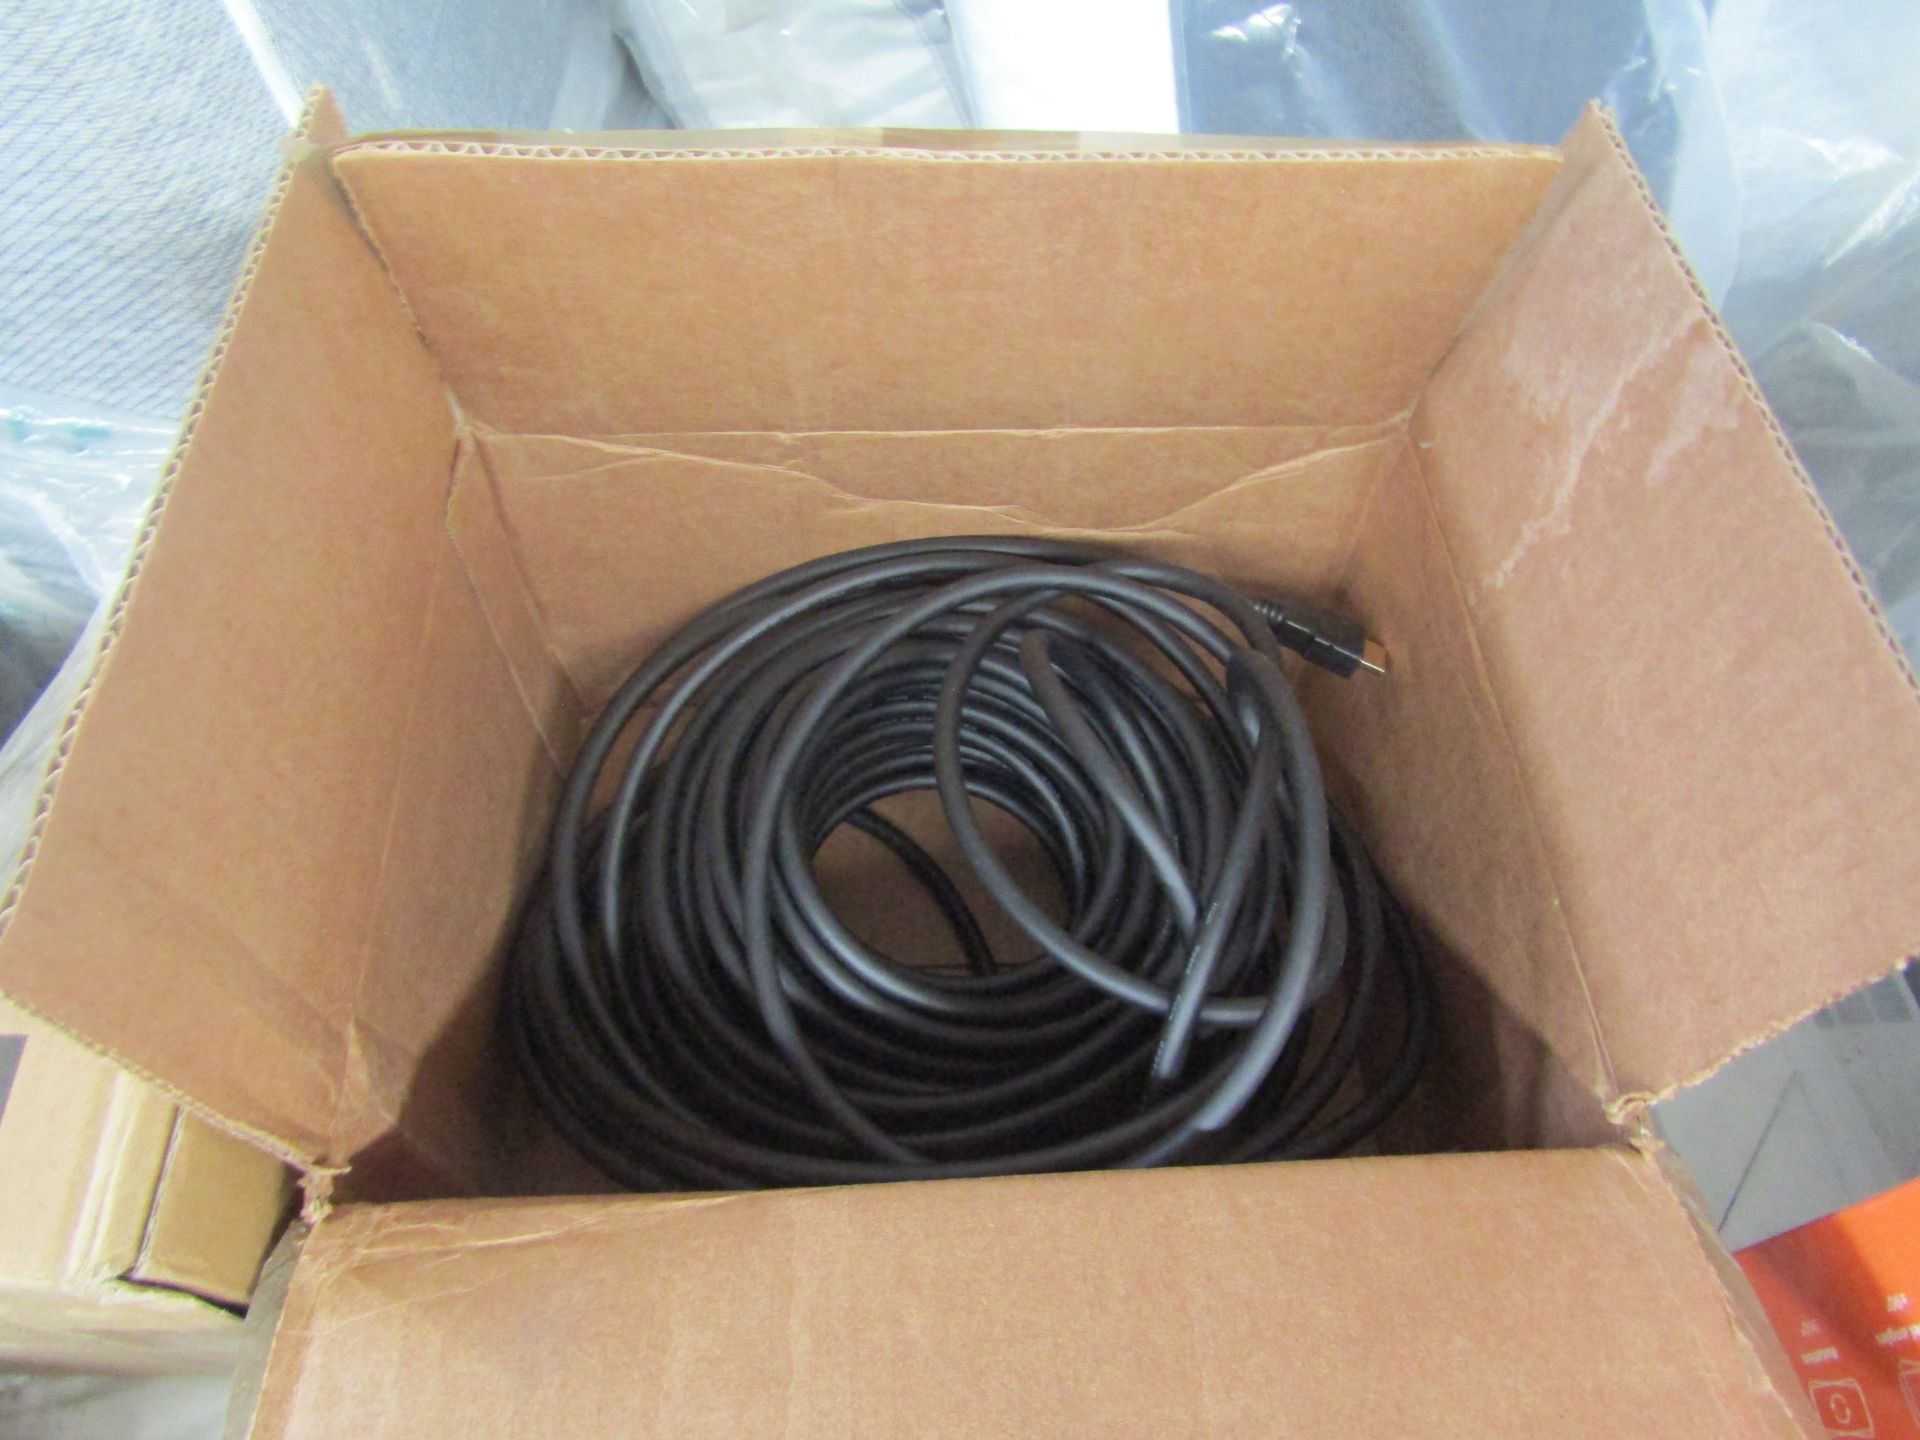 HDMI Cable Approx 10m, Unchecked & Loose In Box.